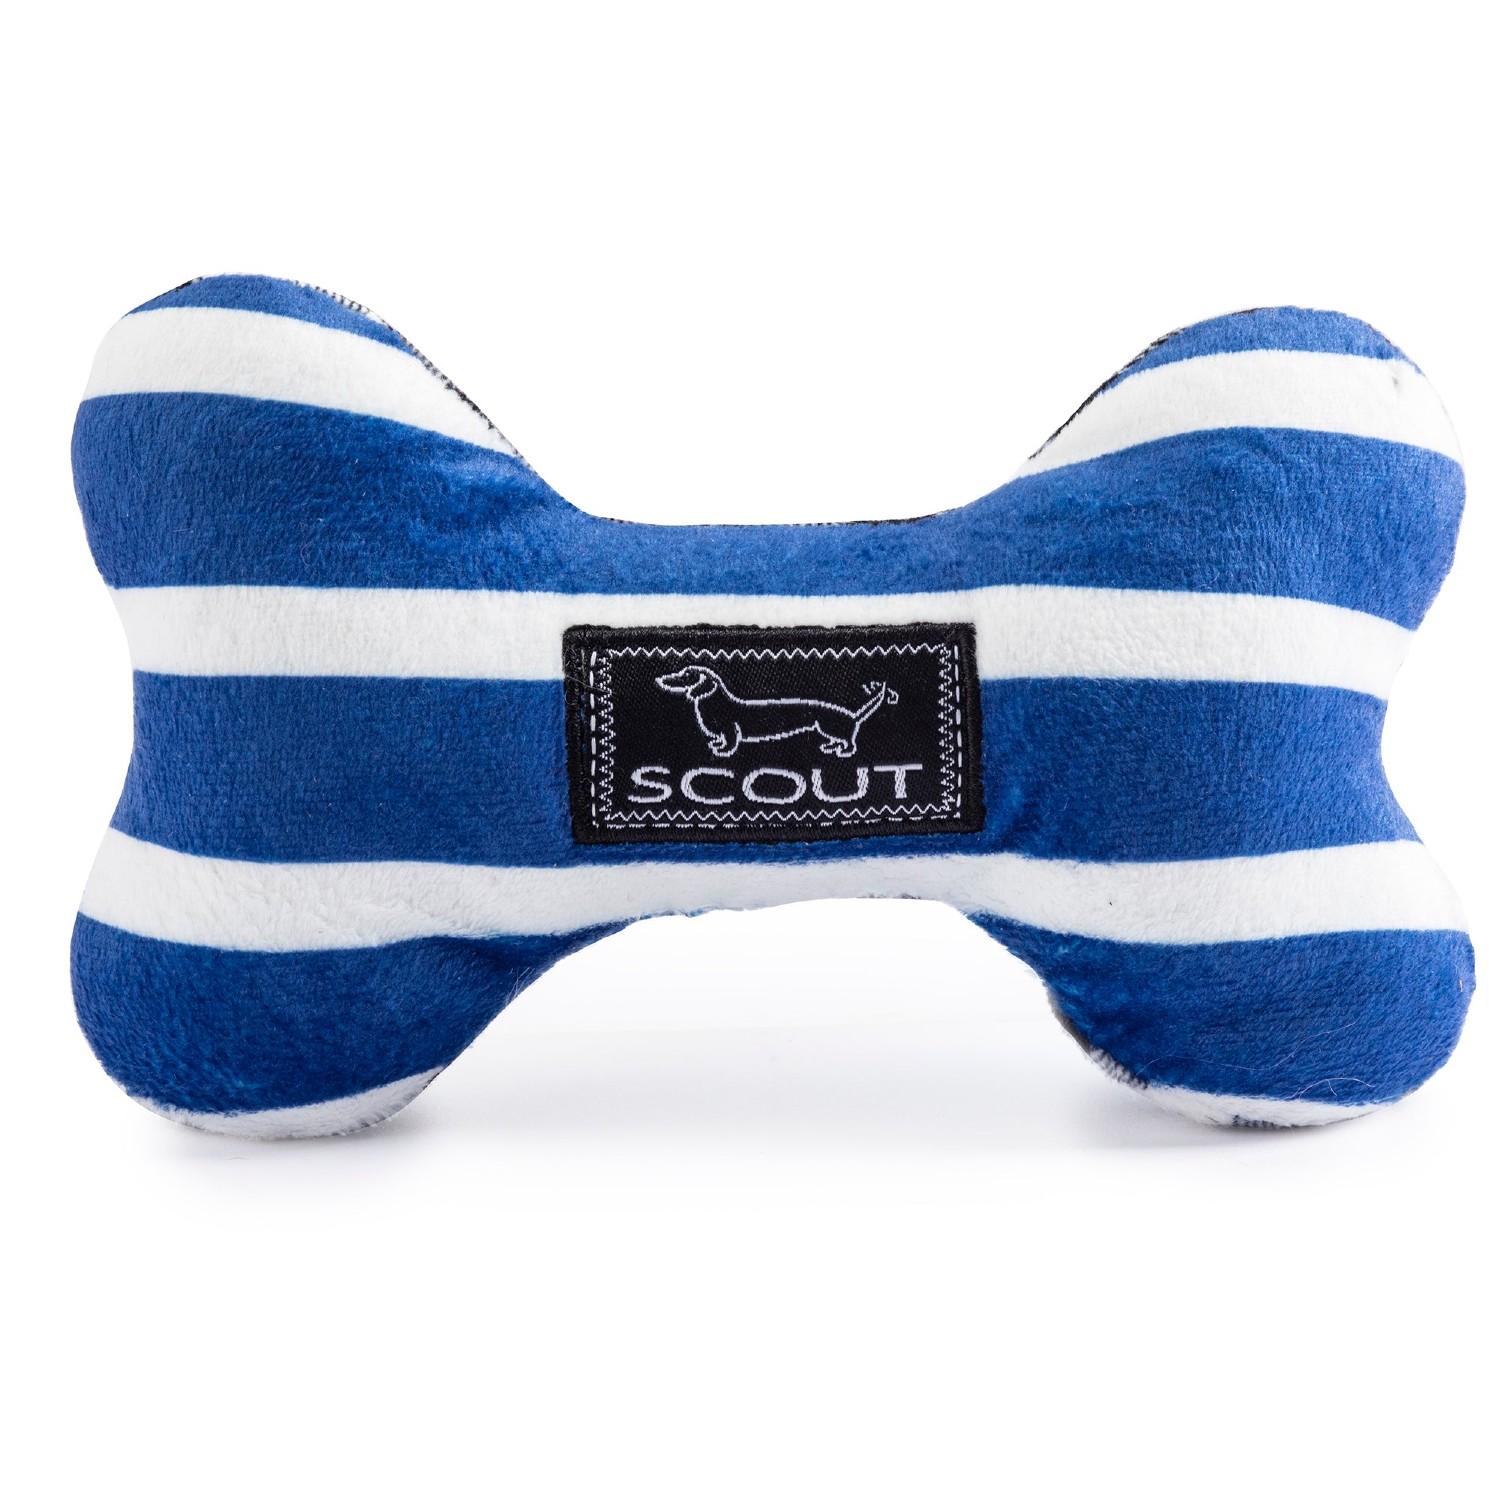 Haute Diggity Dog SCOUT Bone Dog Toy - Limited Edition